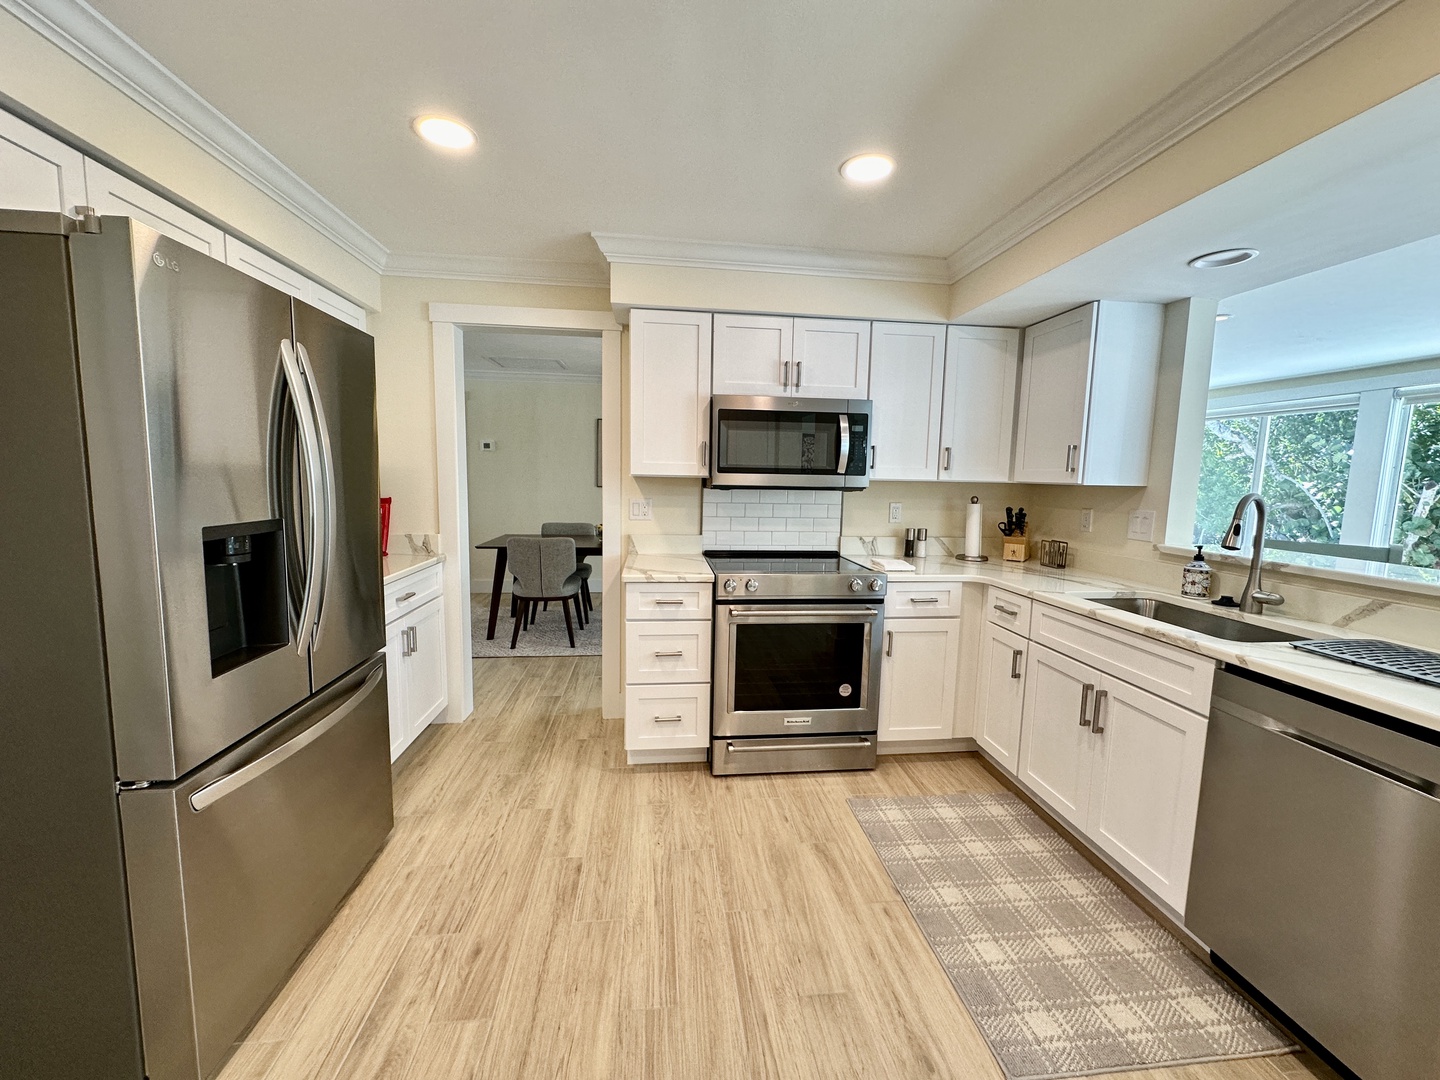 The fully-equipped kitchen has quartz countertops